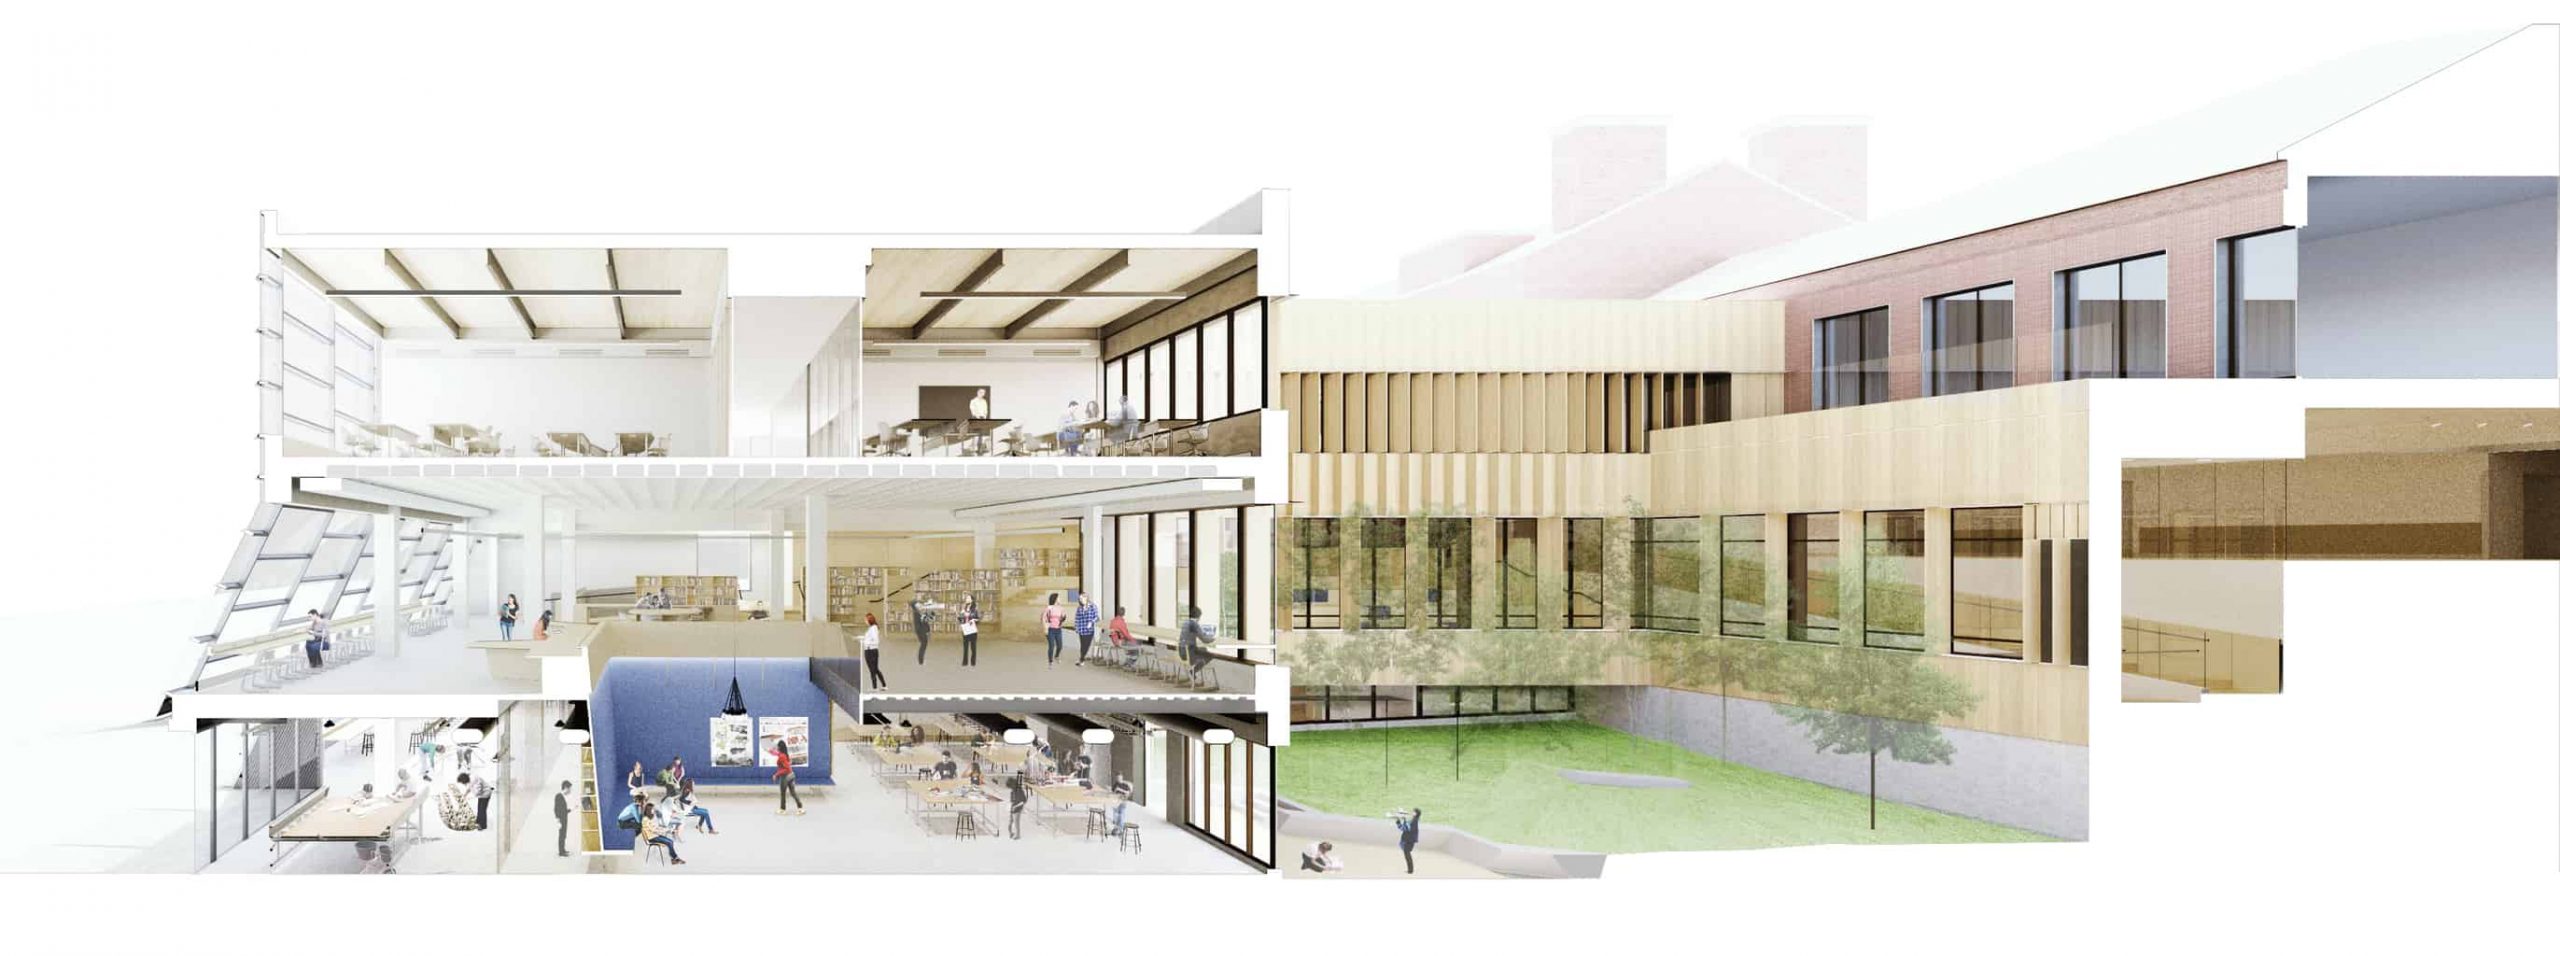 Acentech_Beaver Country Day School_Section light_Rendering credit NADAAA